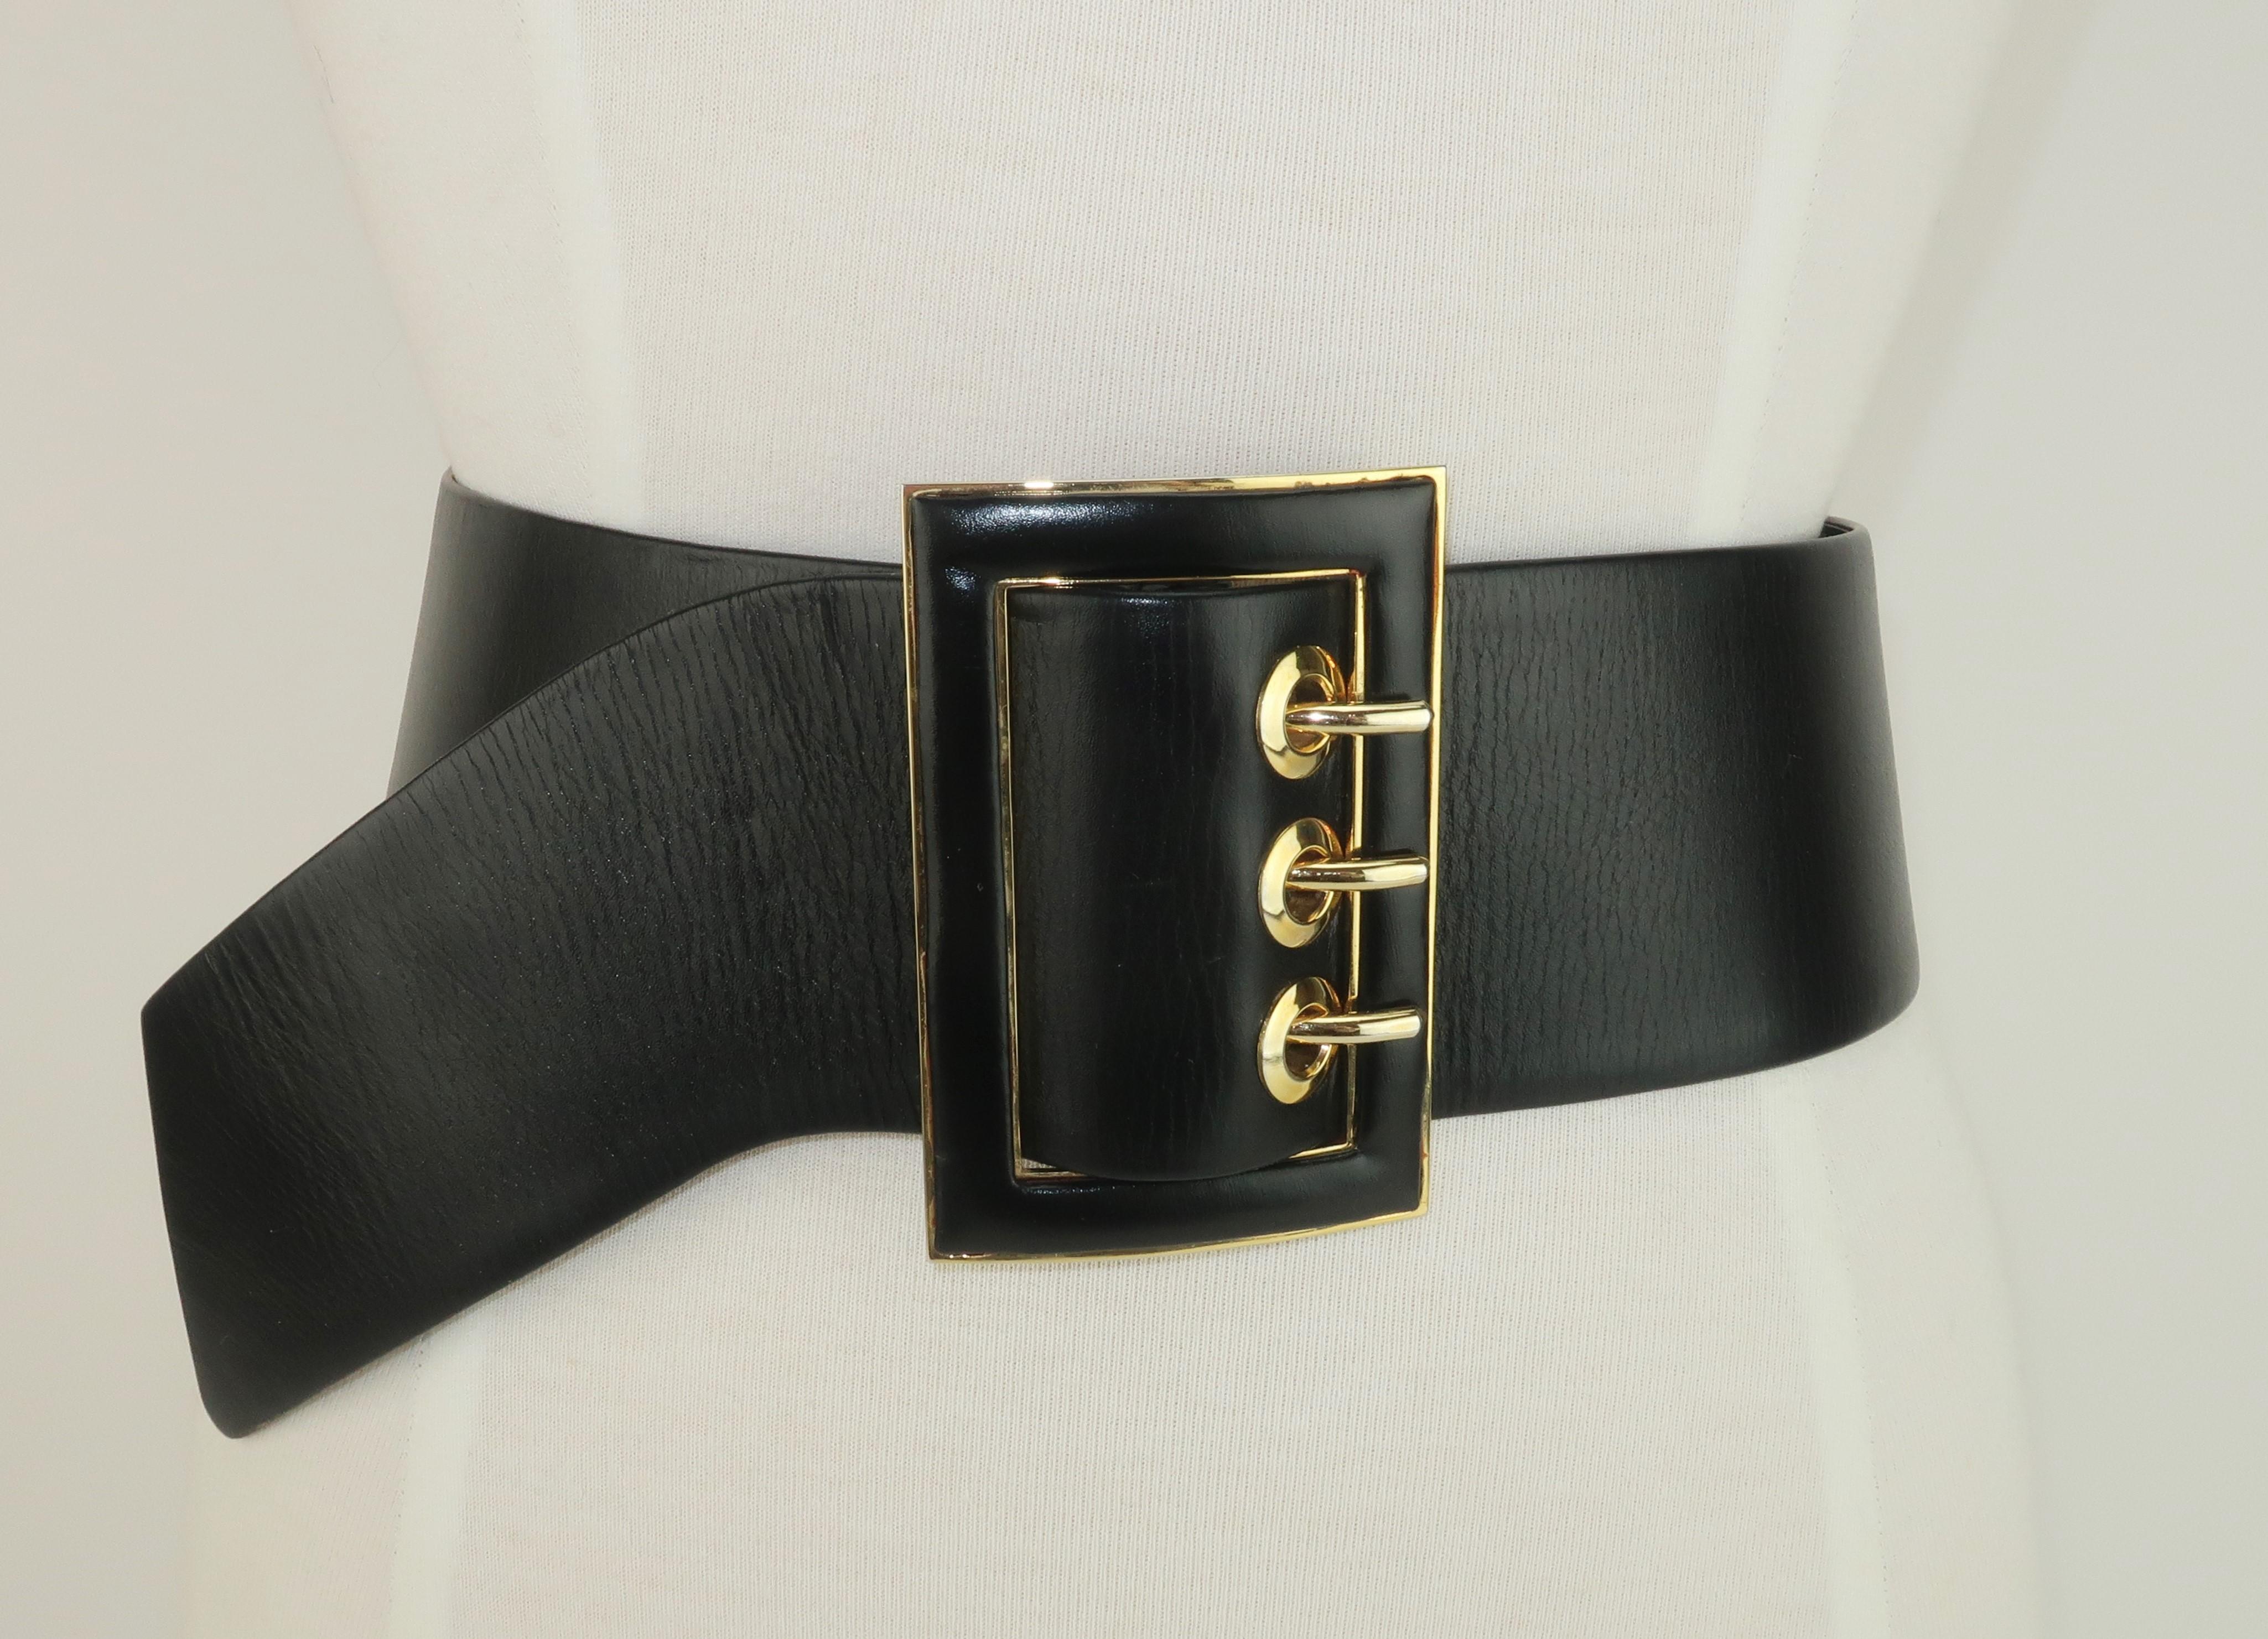 Judith Leiber black leather belt with gold plated hardware and an easy adjustable style.  The unique design has a curved ‘tail’ and two sliding parts so that it can be worn at different lengths.  A wonderful wardrobe staple with quality materials